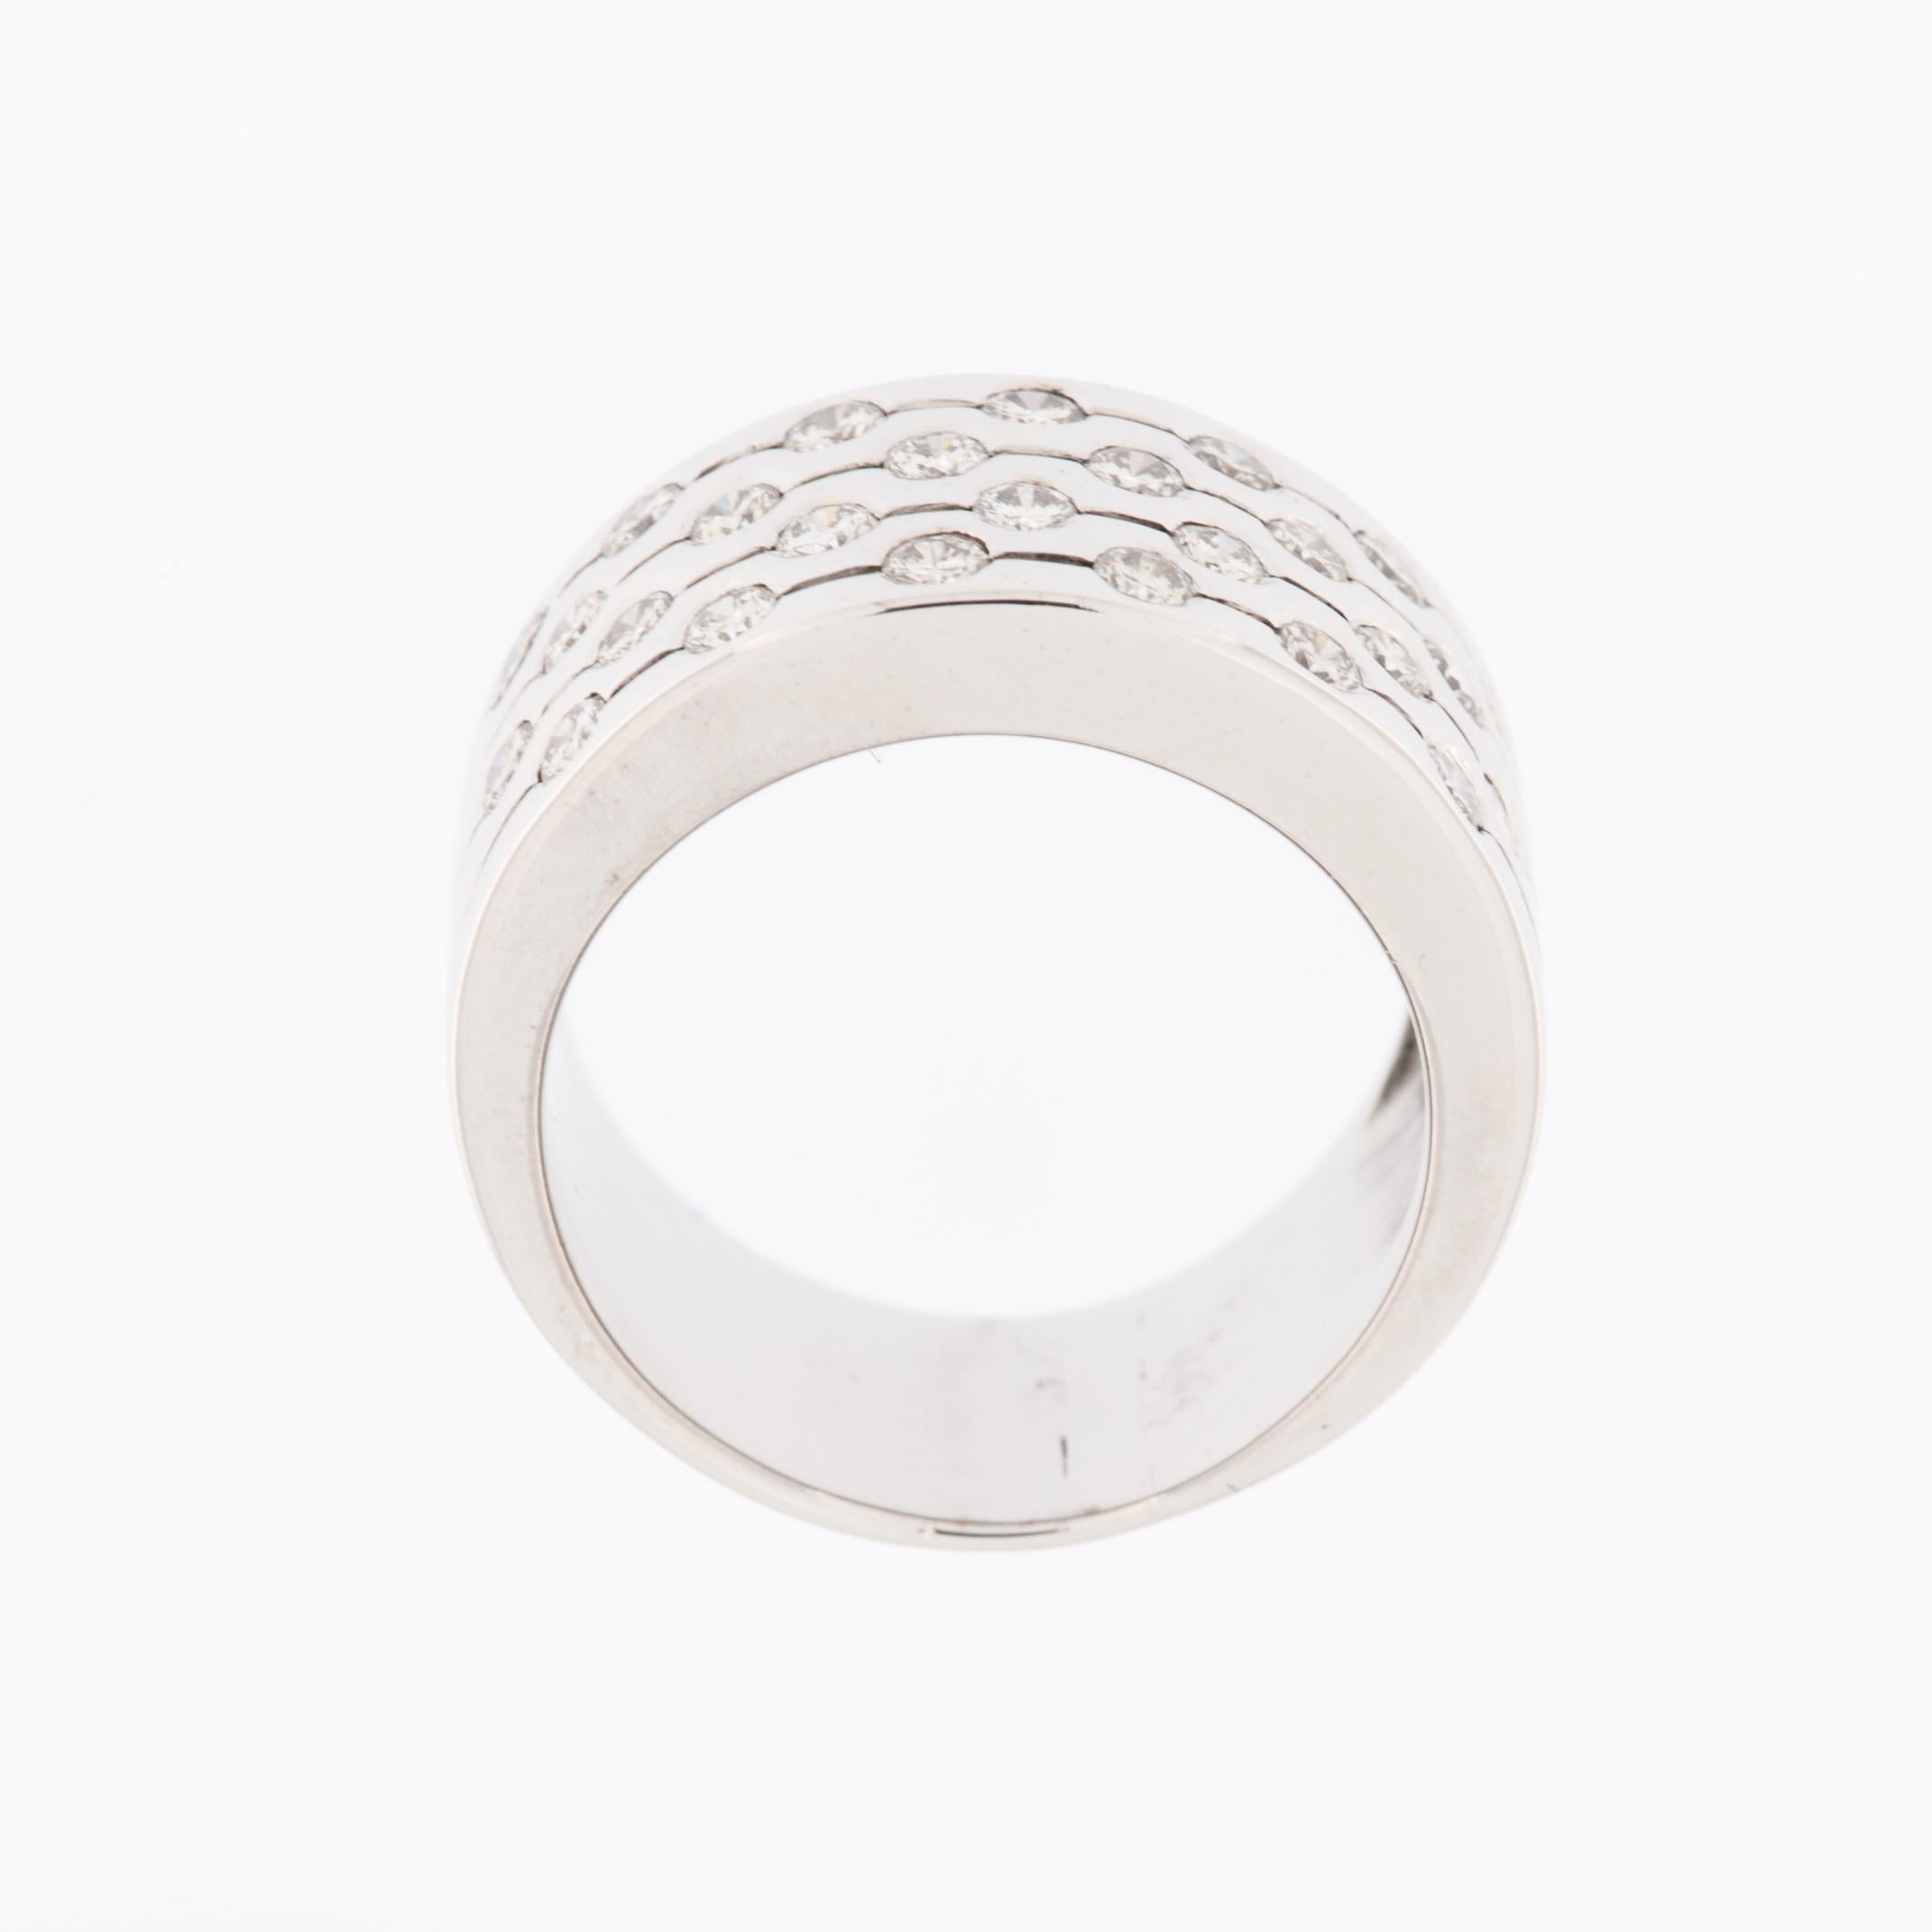 The Modern Italian 18kt White Gold Band Ring with Diamonds is a luxurious and elegant piece of jewelry that reflects contemporary Italian design and craftsmanship. Crafted from 18-karat white gold, the band ring features a sleek and polished surface